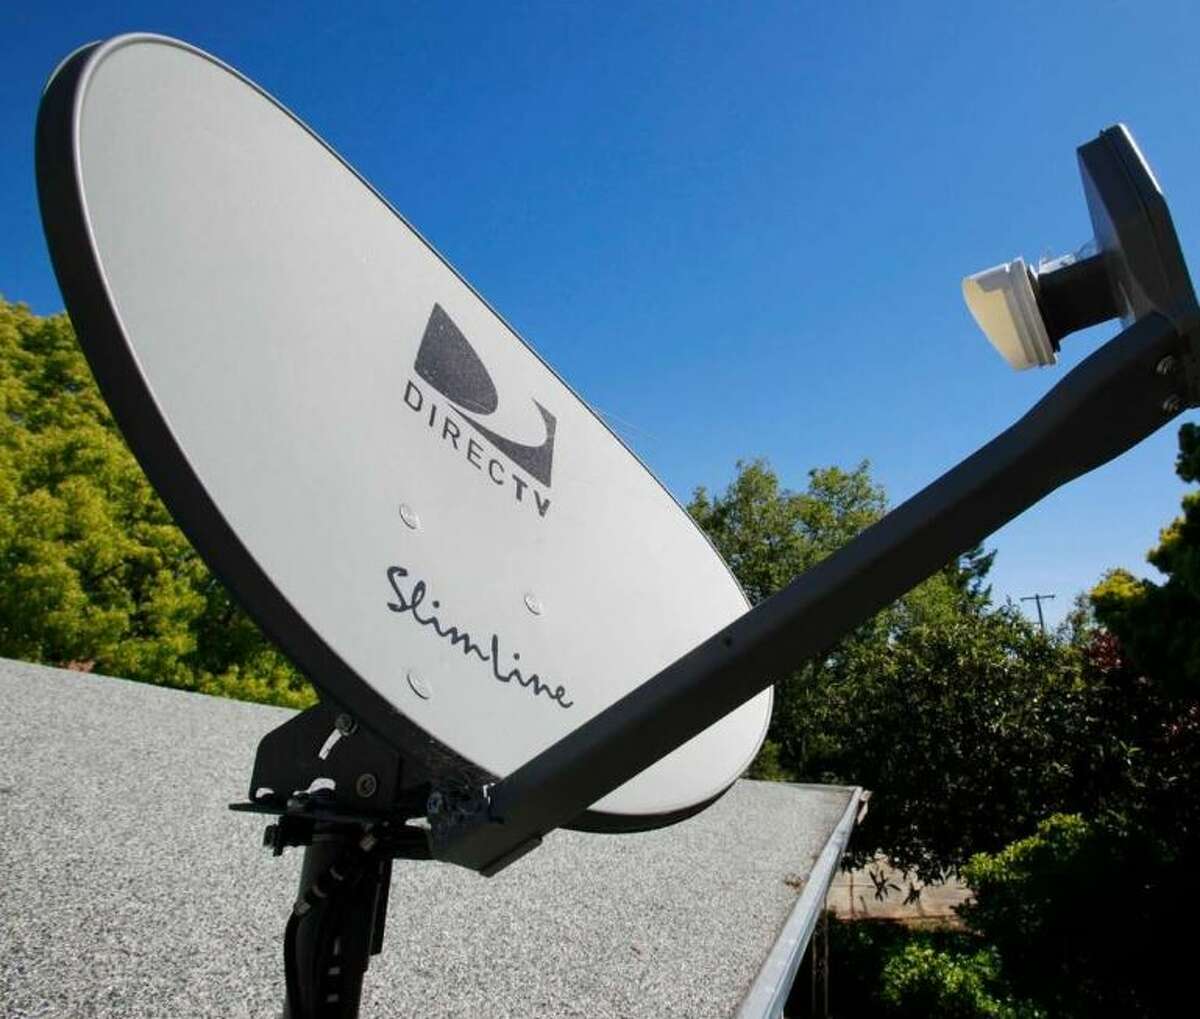 DirecTV sues broadcasters; viewers remain blacked out